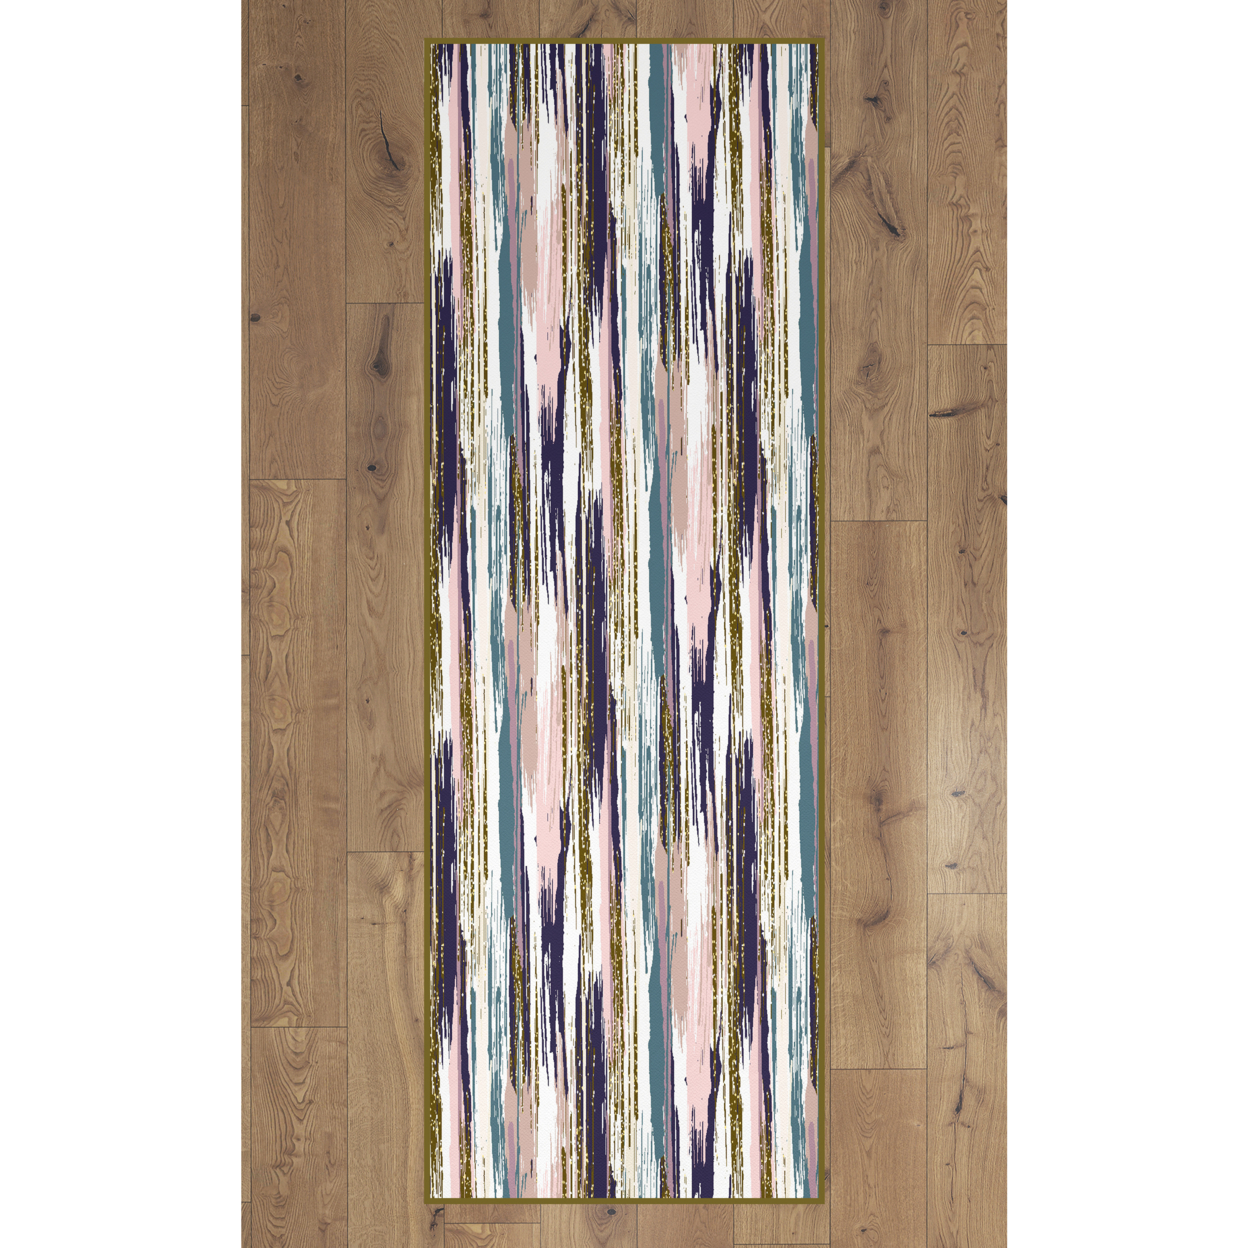 Deerlux Modern Living Room Area Rug With Nonslip Backing, Abstract Brushstrokes And Glitter Pattern - 2.5 X 6.5